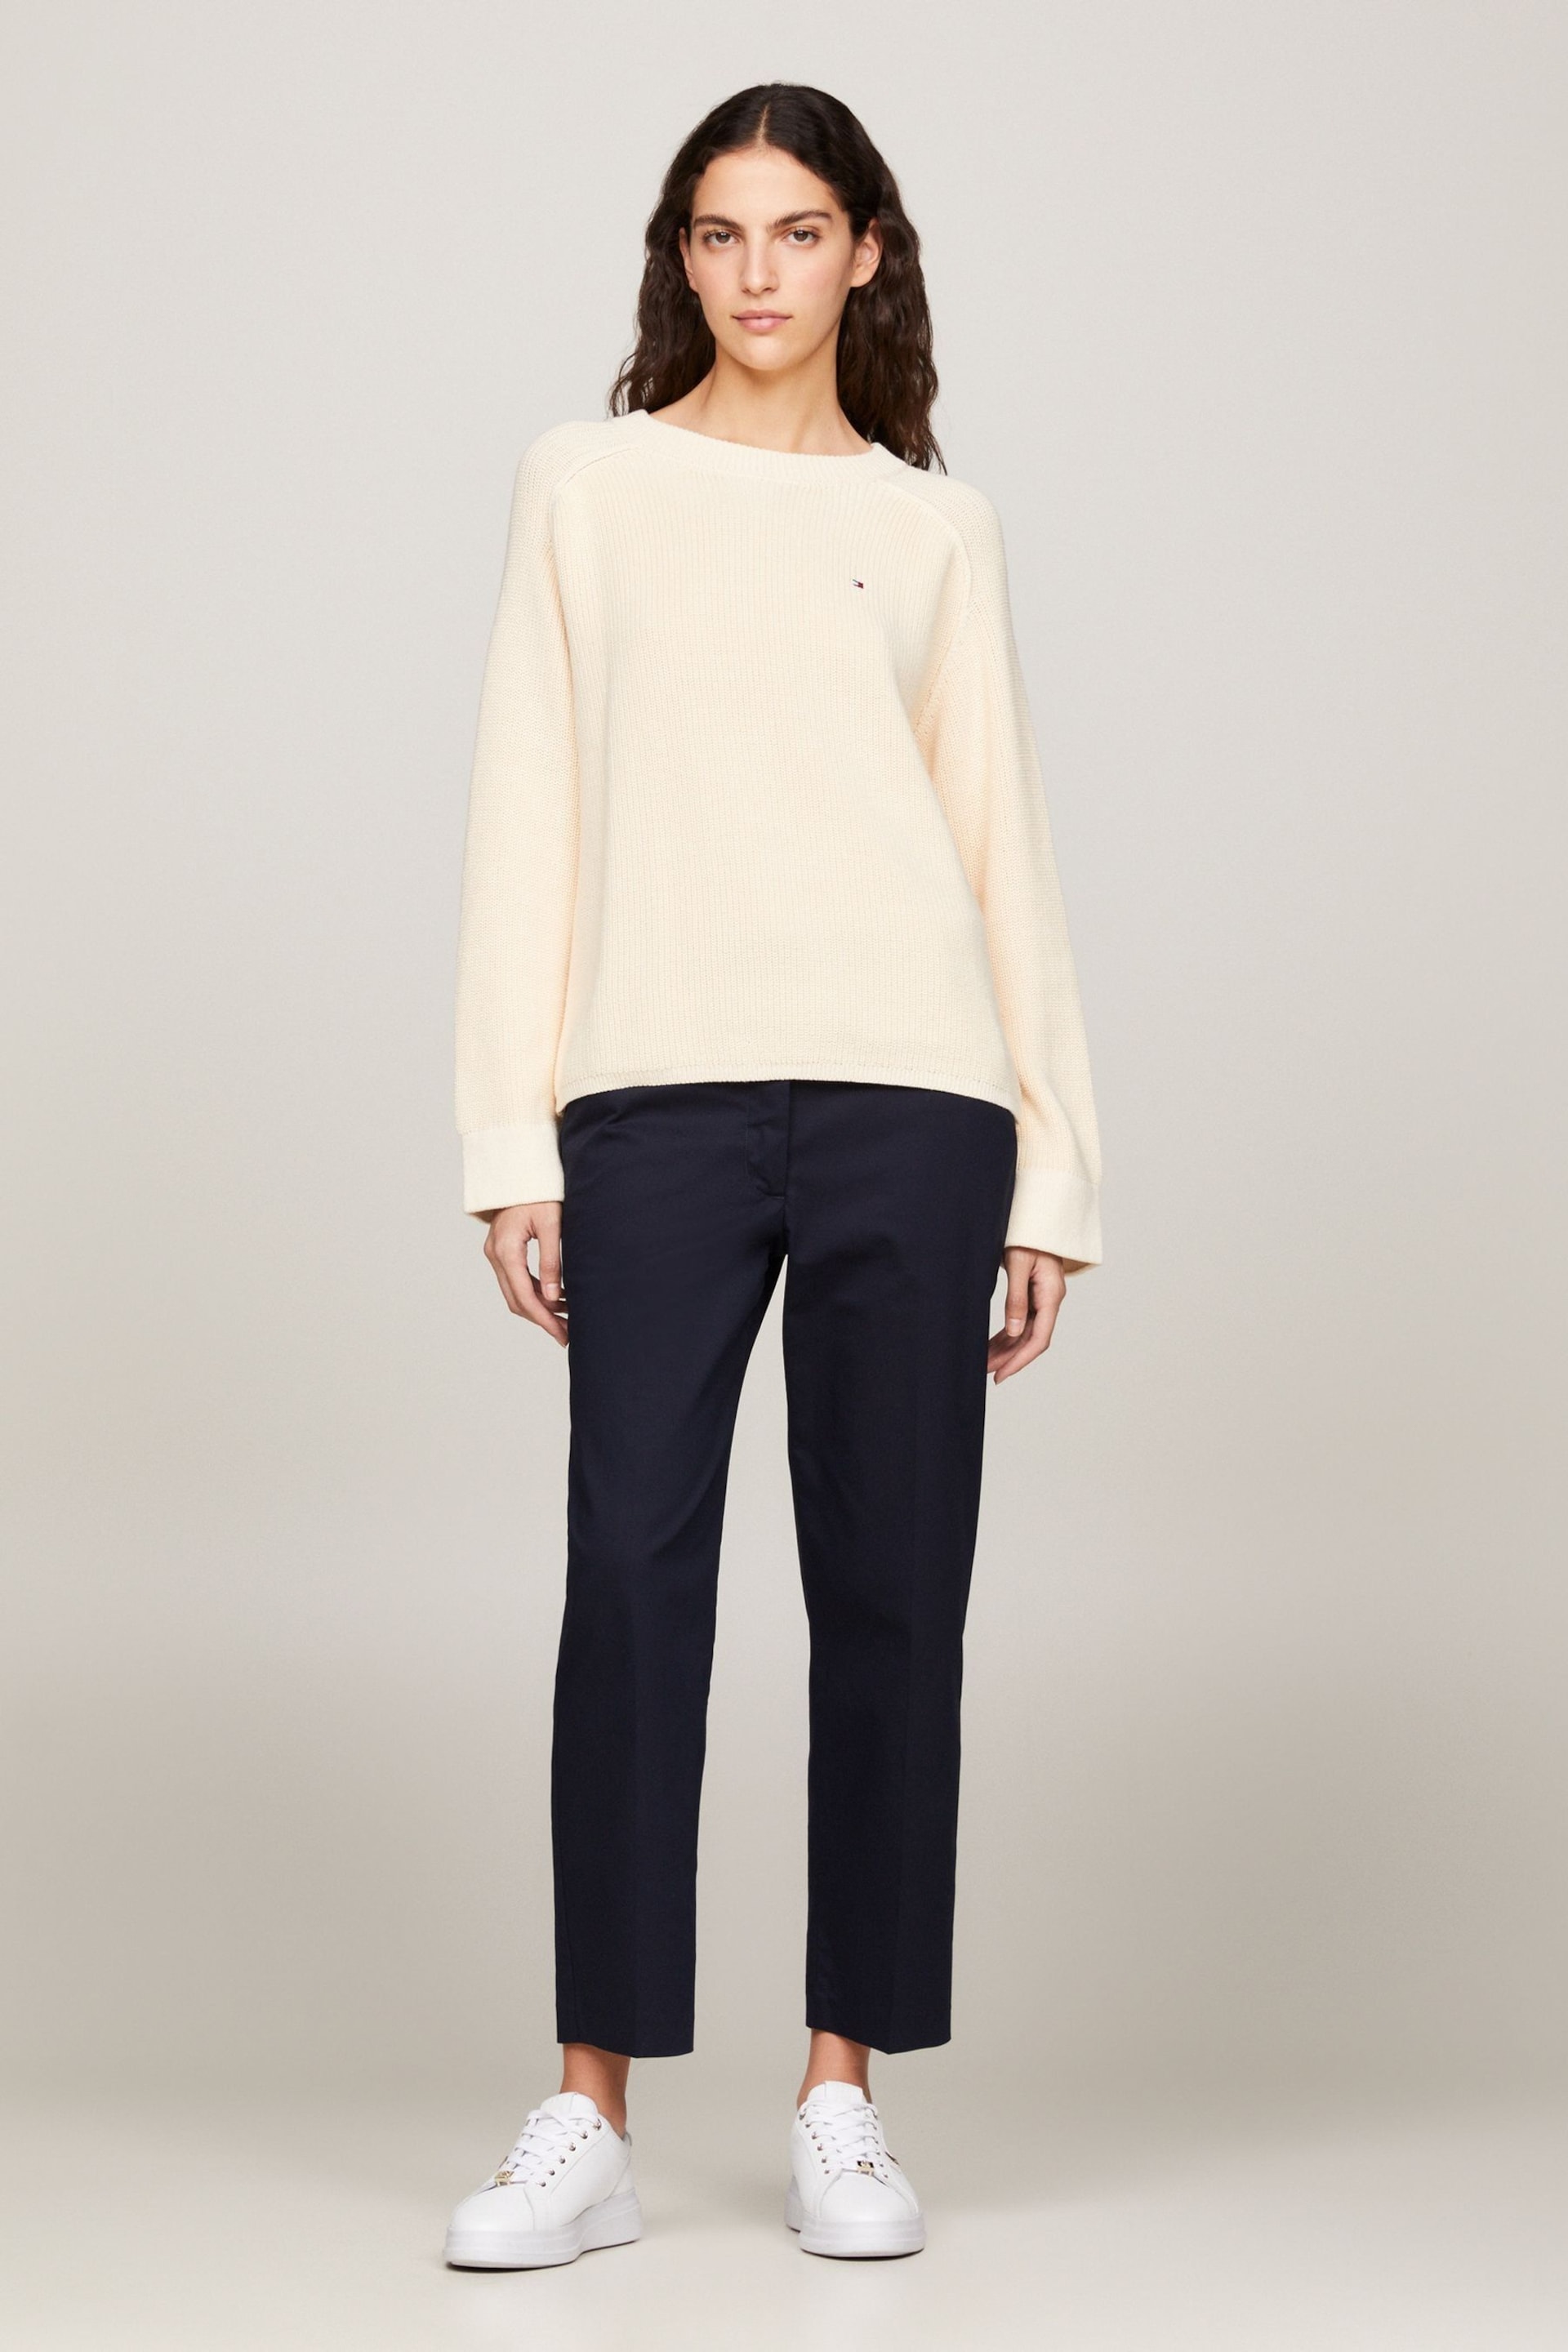 Tommy Hilfiger Cream Knit Sweater - Image 3 of 7